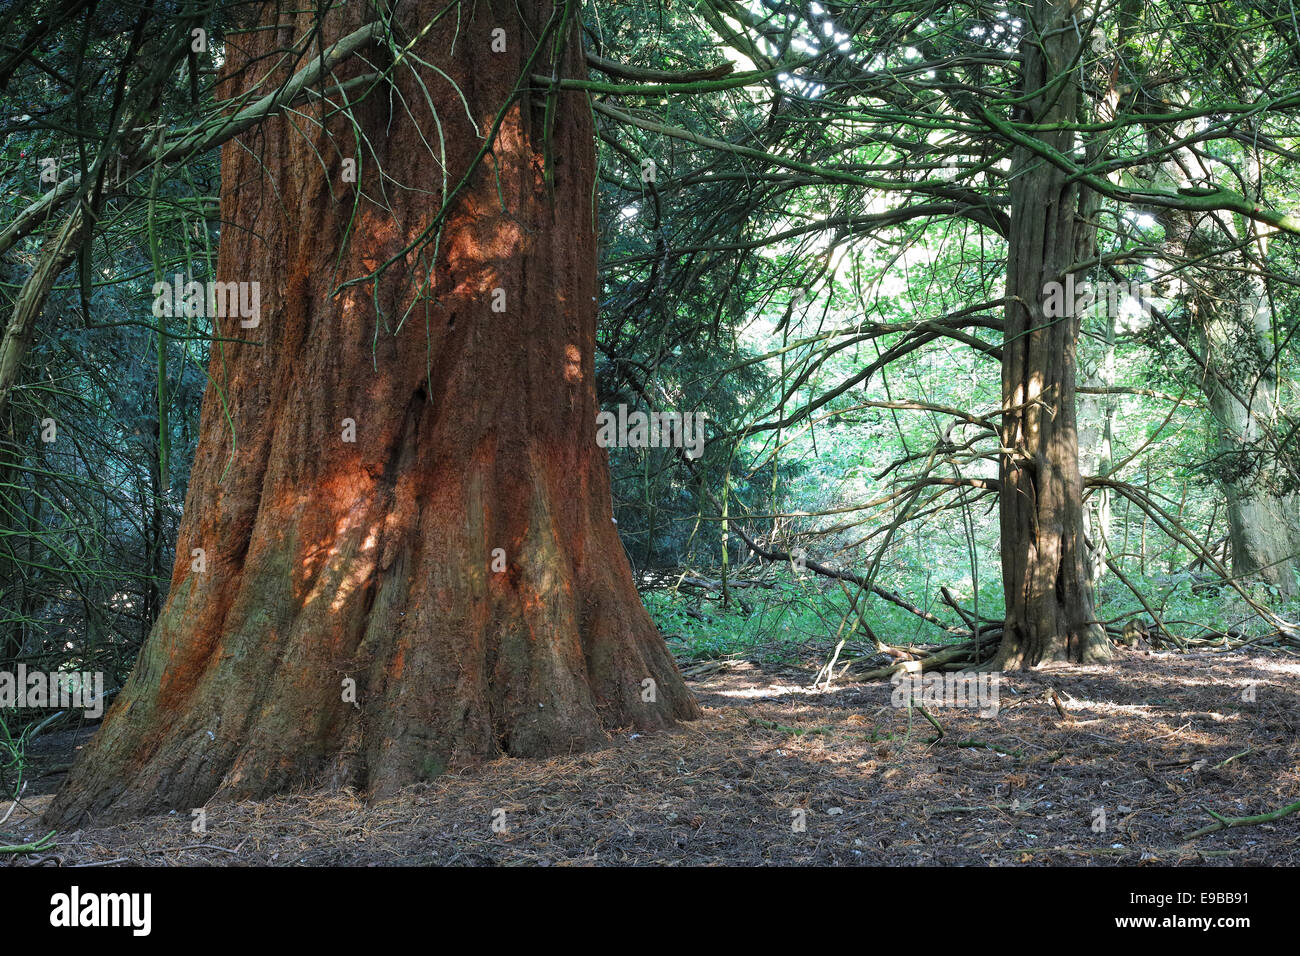 Giant Pine tree trunk with thick spongy bark to protect it from forest fires Stock Photo